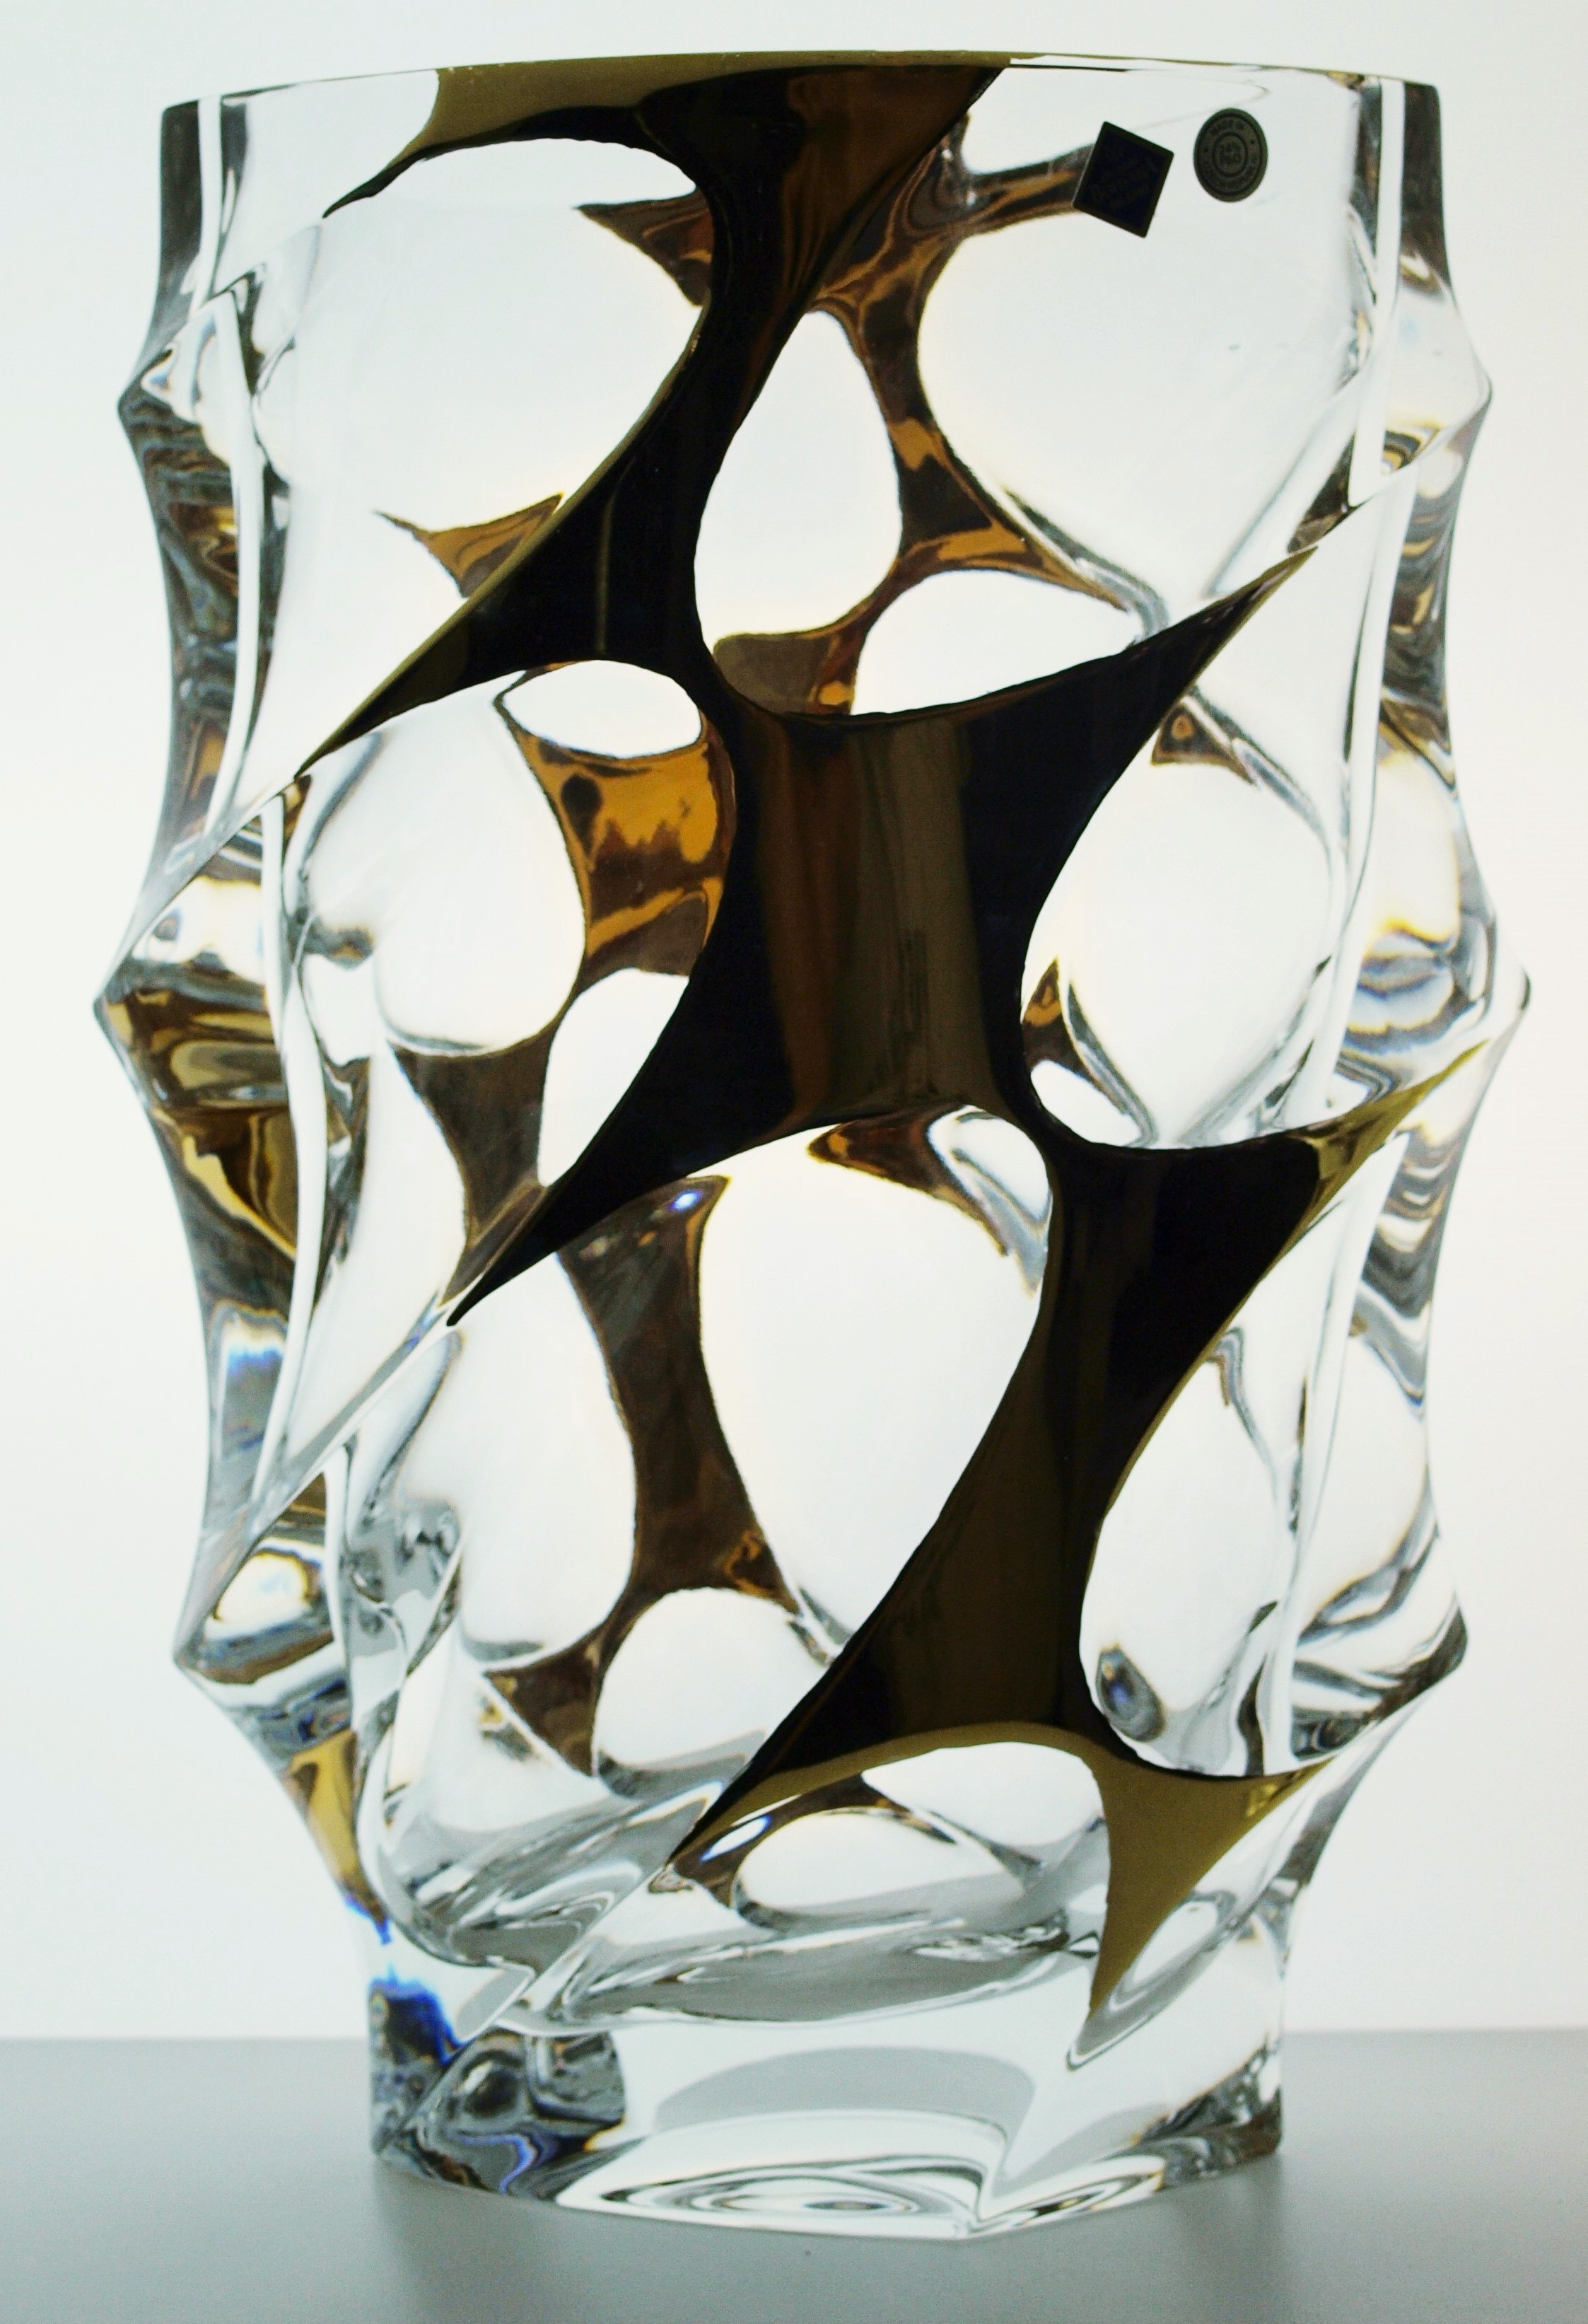 13 Stunning Swarovski Crystalline Vase 2024 free download swarovski crystalline vase of gold glass vase with unique modern design made from full lead crystal in glass vase calypso gold